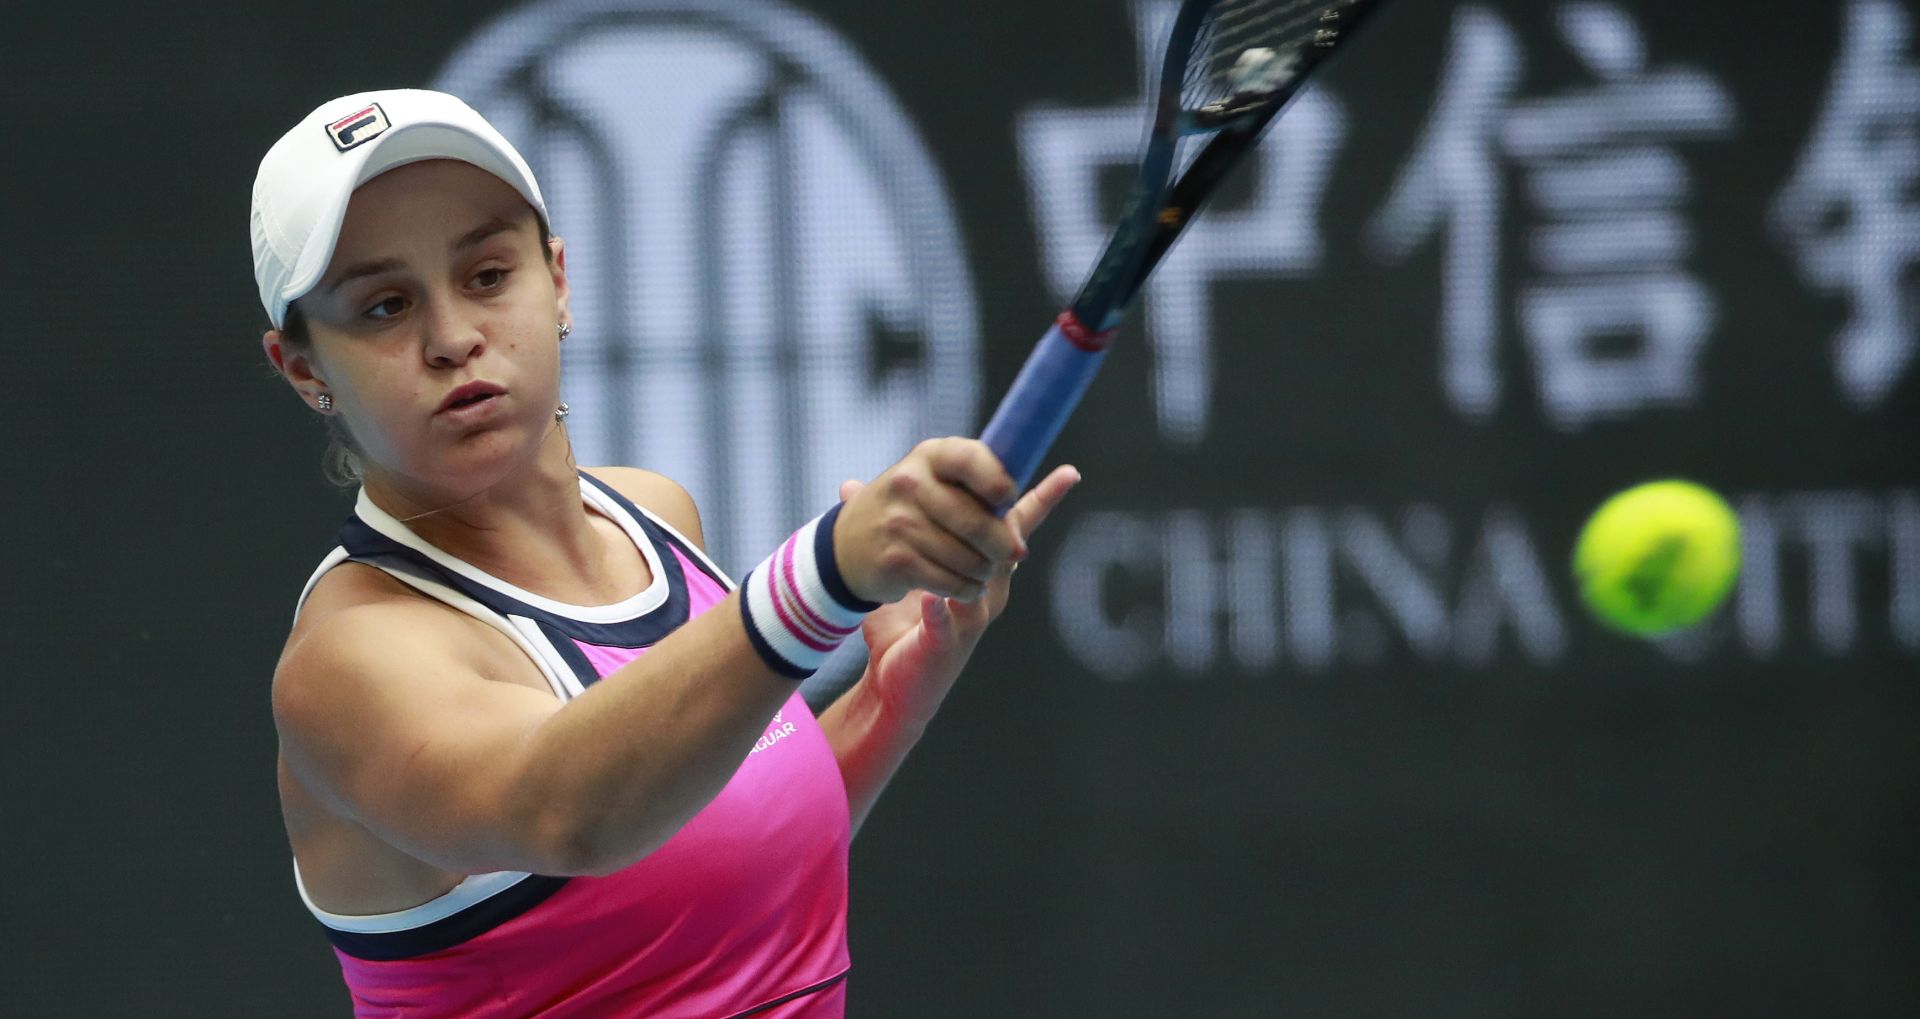 epa07894473 Ashleigh Barty of Australia in action against Petra Kvitova of Czech Republic during their women’s singles quarter-final match at the China Open Tennis tournament in Beijing, China, 04 October 2019.  EPA/HOW HWEE YOUNG